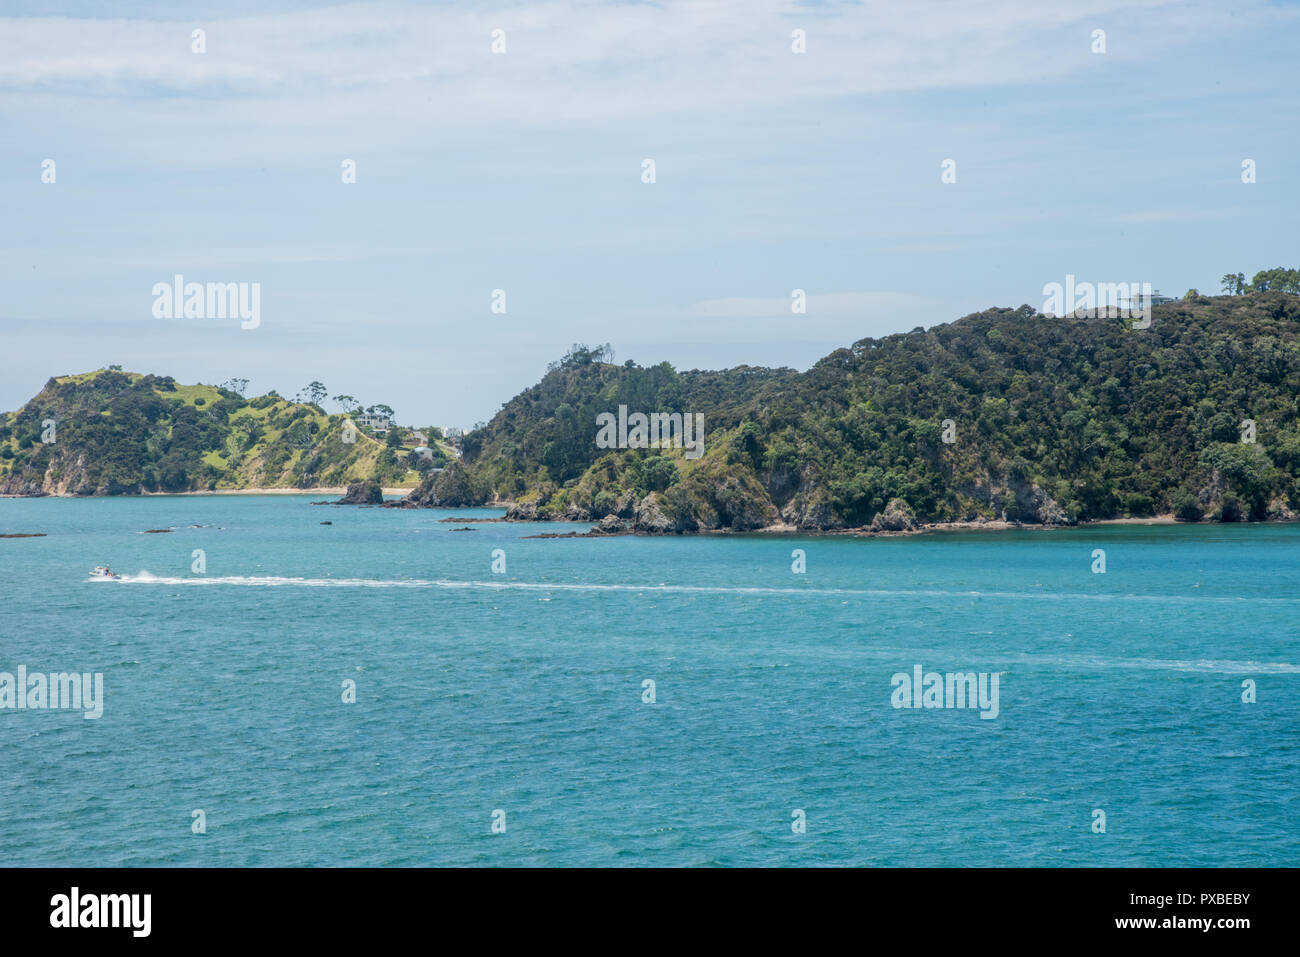 Bay of Islands, North Island, New Zealand-December 18,2016: Motorboat in the turquoise Tasman Sea with greenery in the Bay of Islands, New Zealand Stock Photo